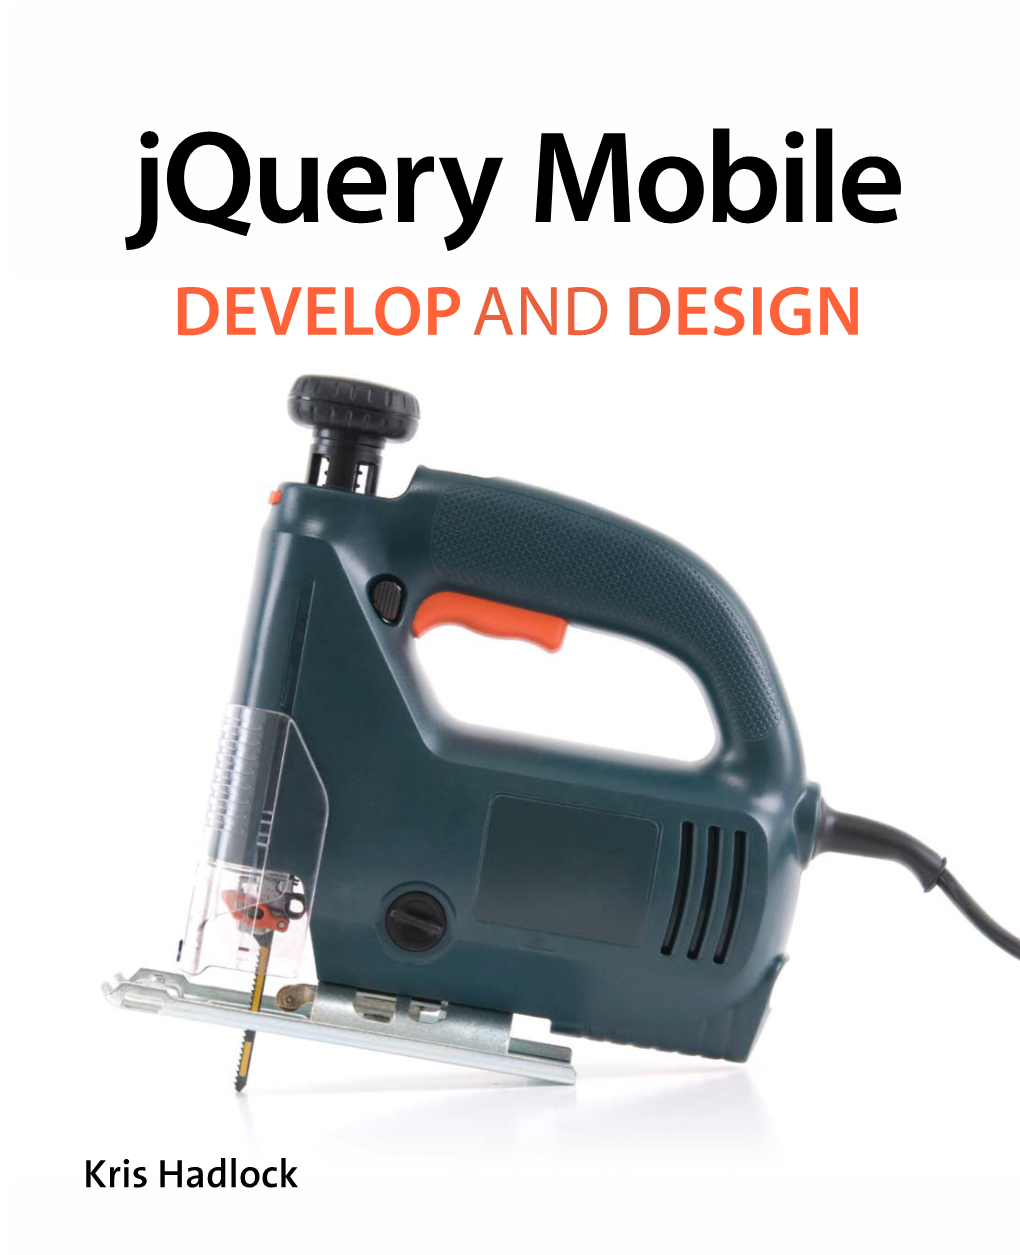 Jquery Mobile Develop and Design Develop and Design Jquery Mobile Jquery